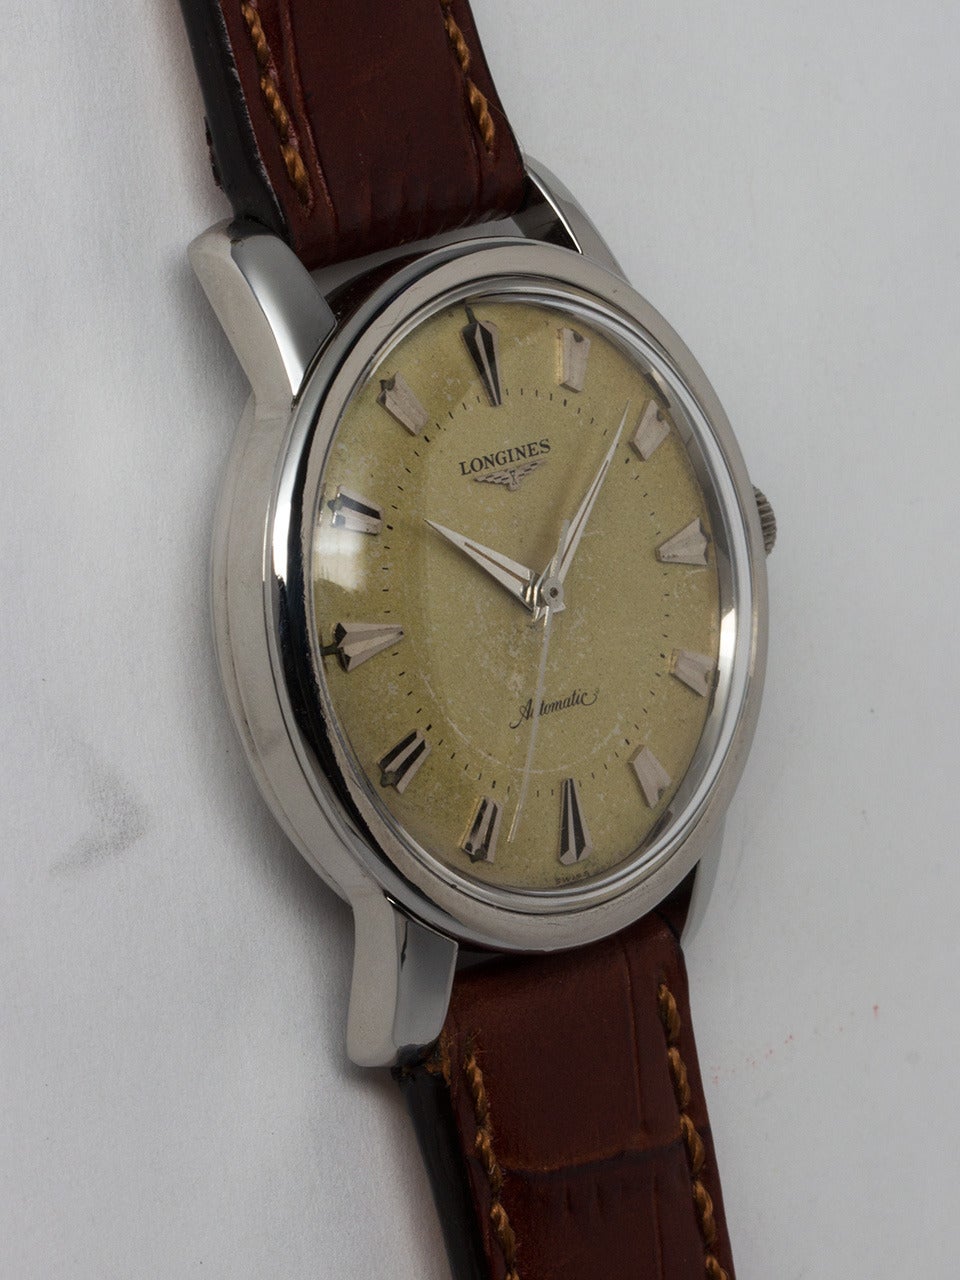 Longines Stainless Steel Automatic Wristwatch circa 1950s. Large and robust 35.5 x 43mm case with wide bezel with heavy extended lugs and screw down water proof style case back . Very pleasing original warmly patina'd matte silvered dial with large